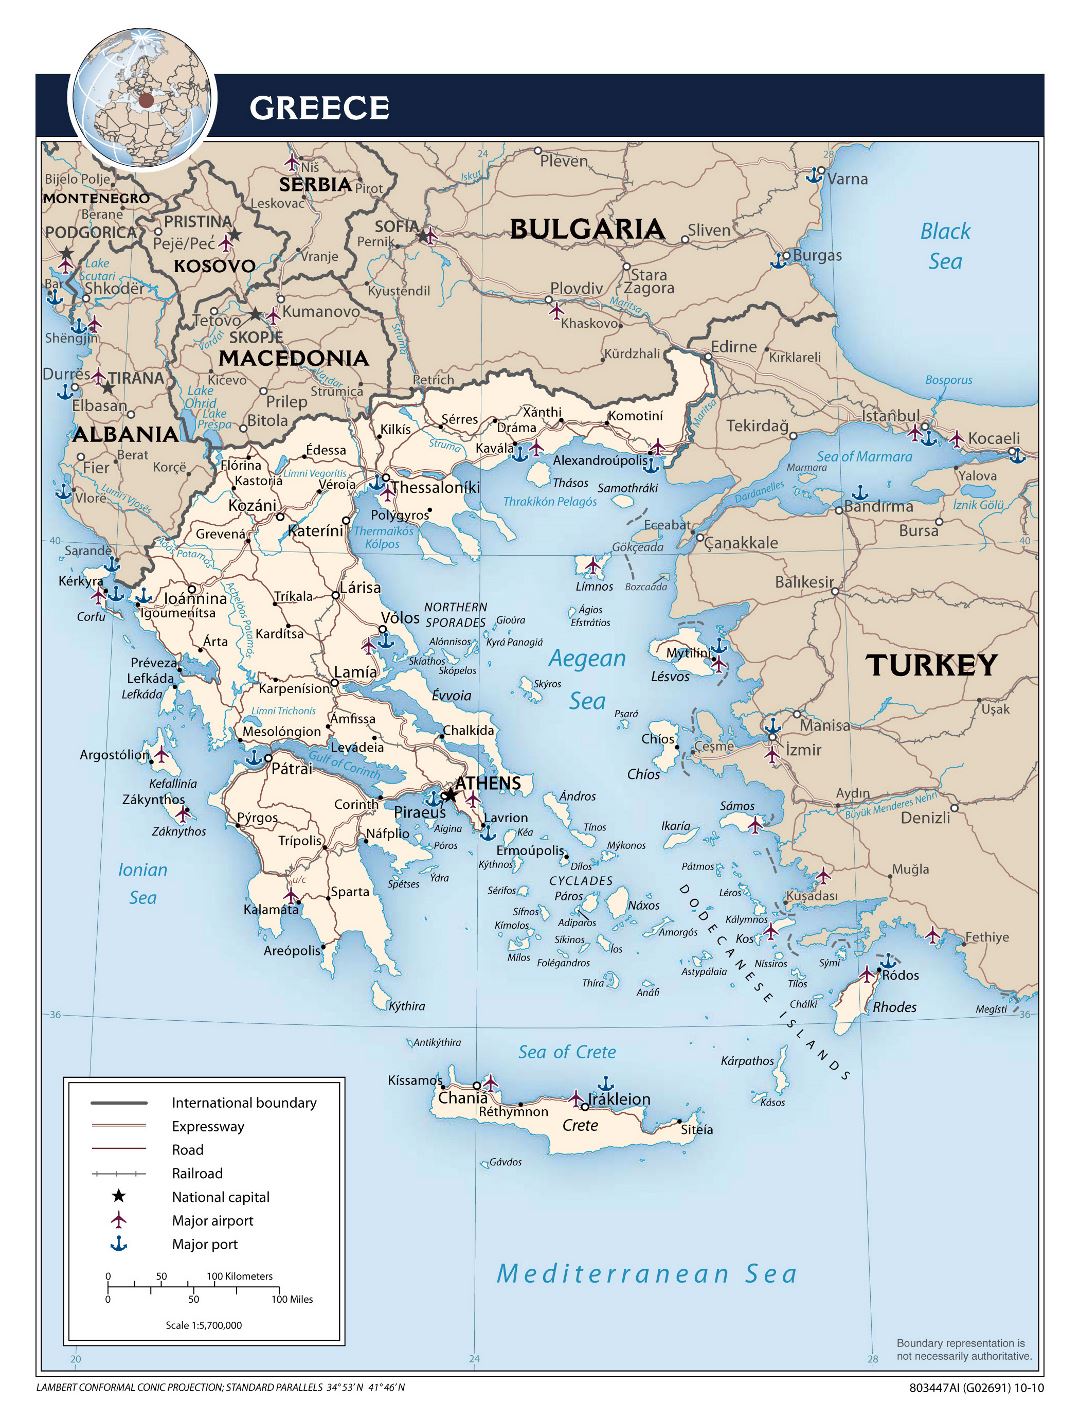 Large scale political map of Greece with roads, major cities, airports and seaports - 2010